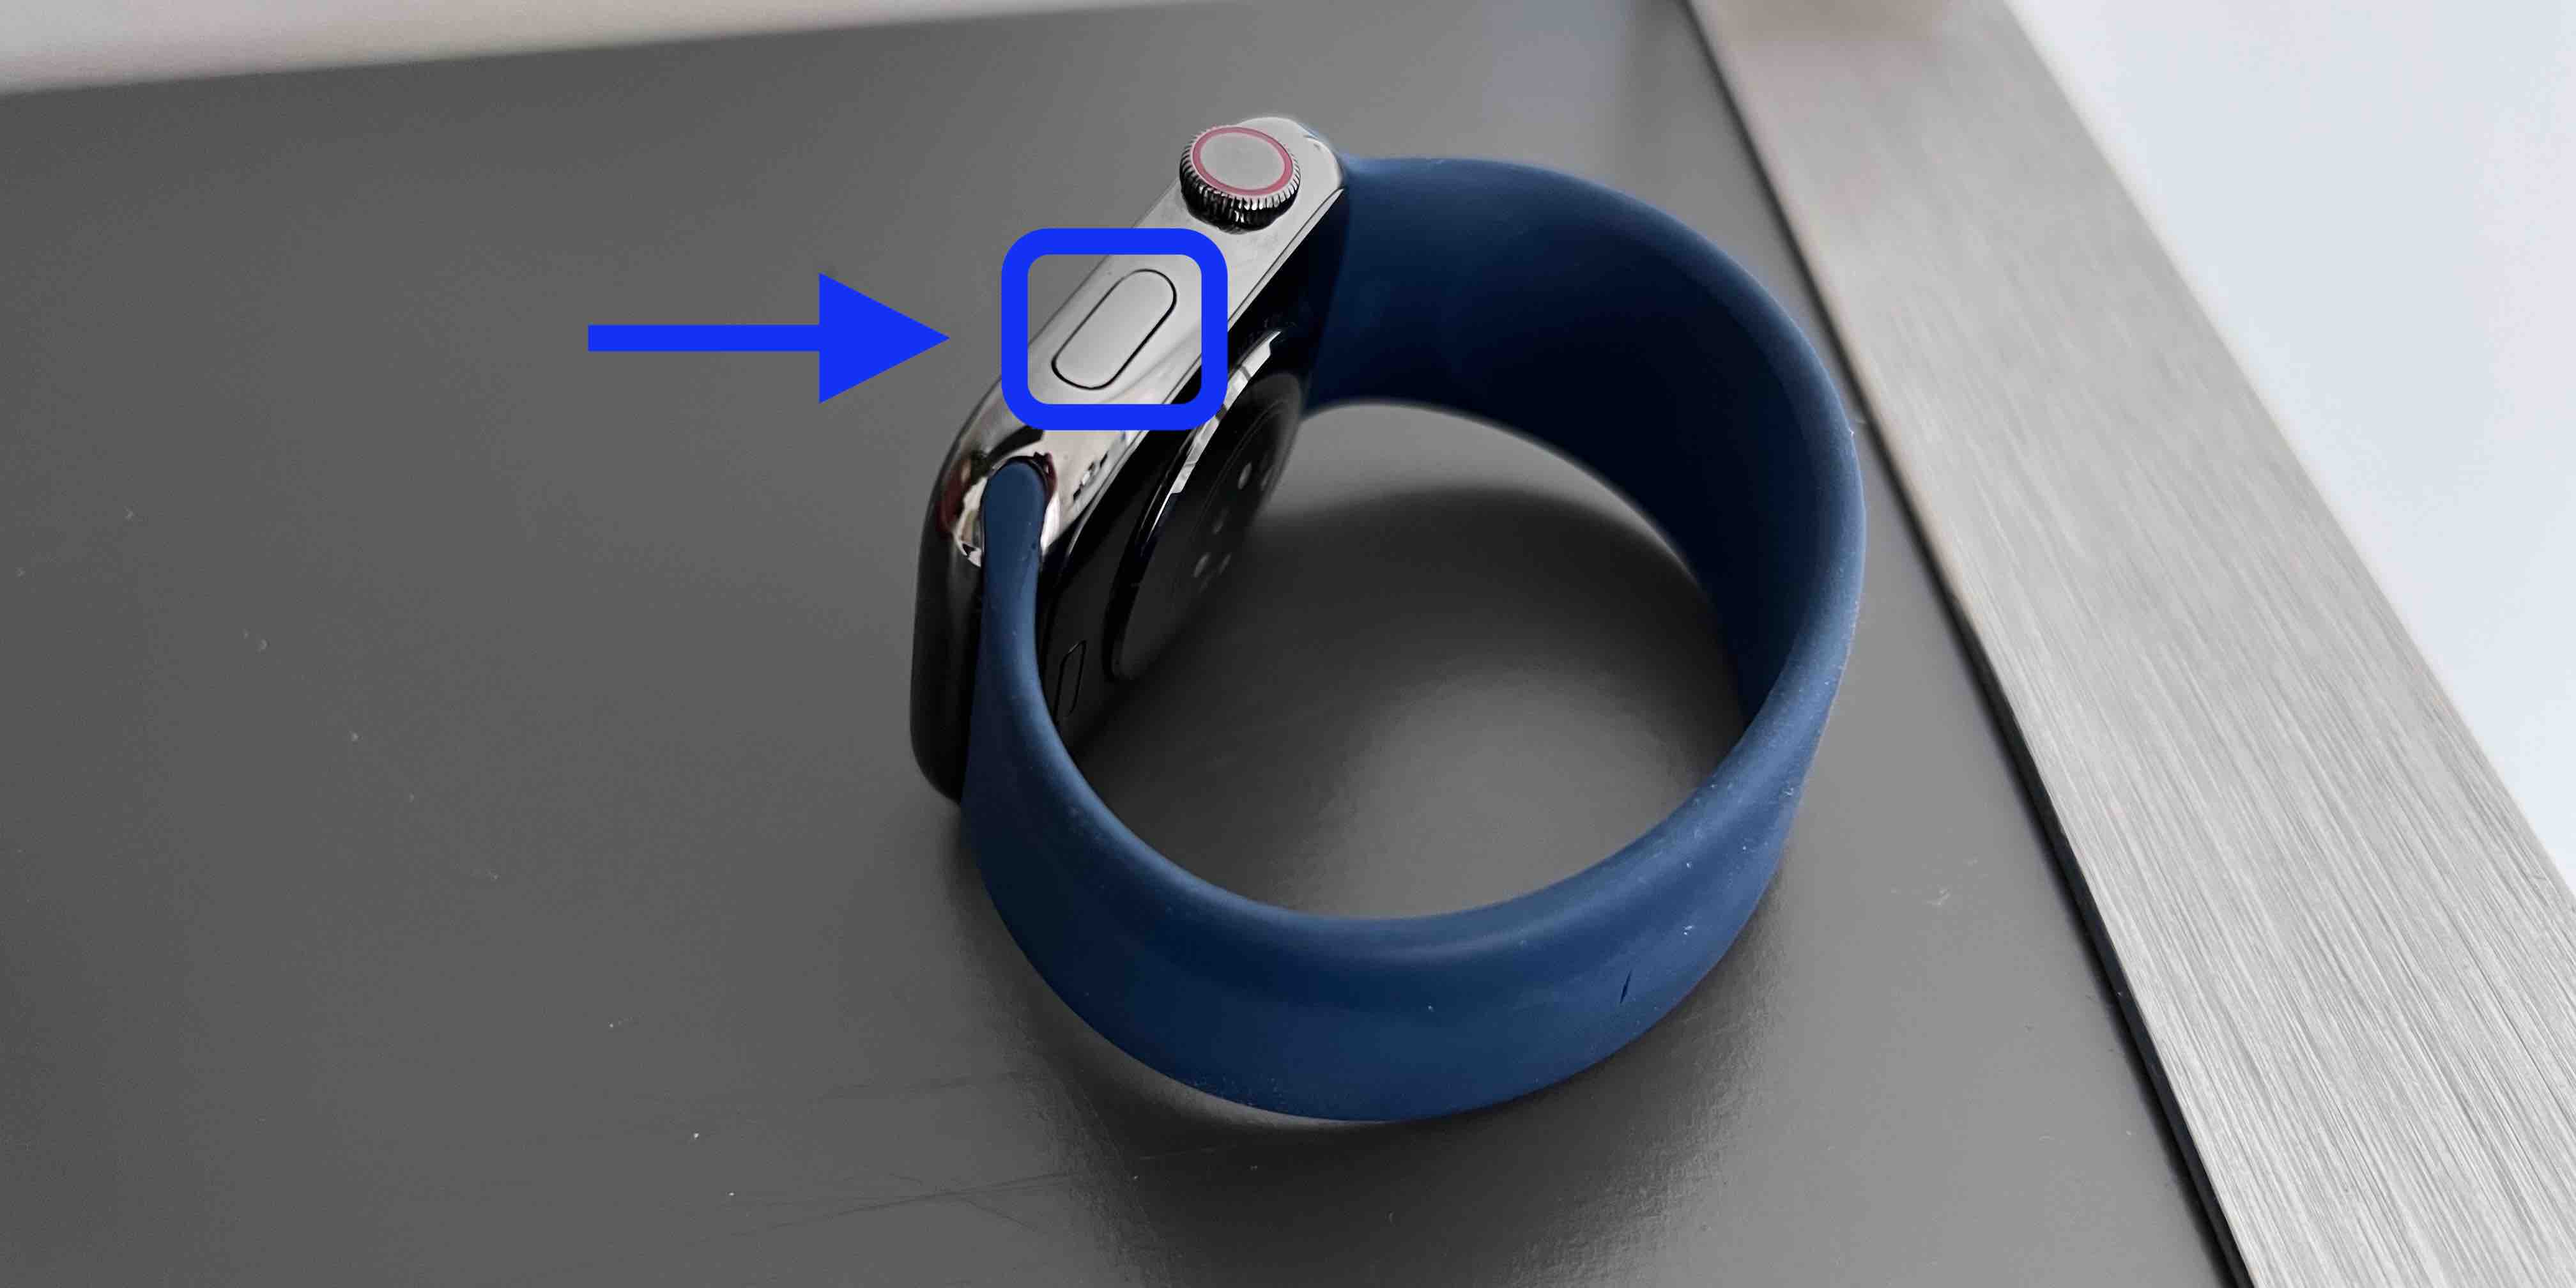 How to turn on Apple Watch tutorial